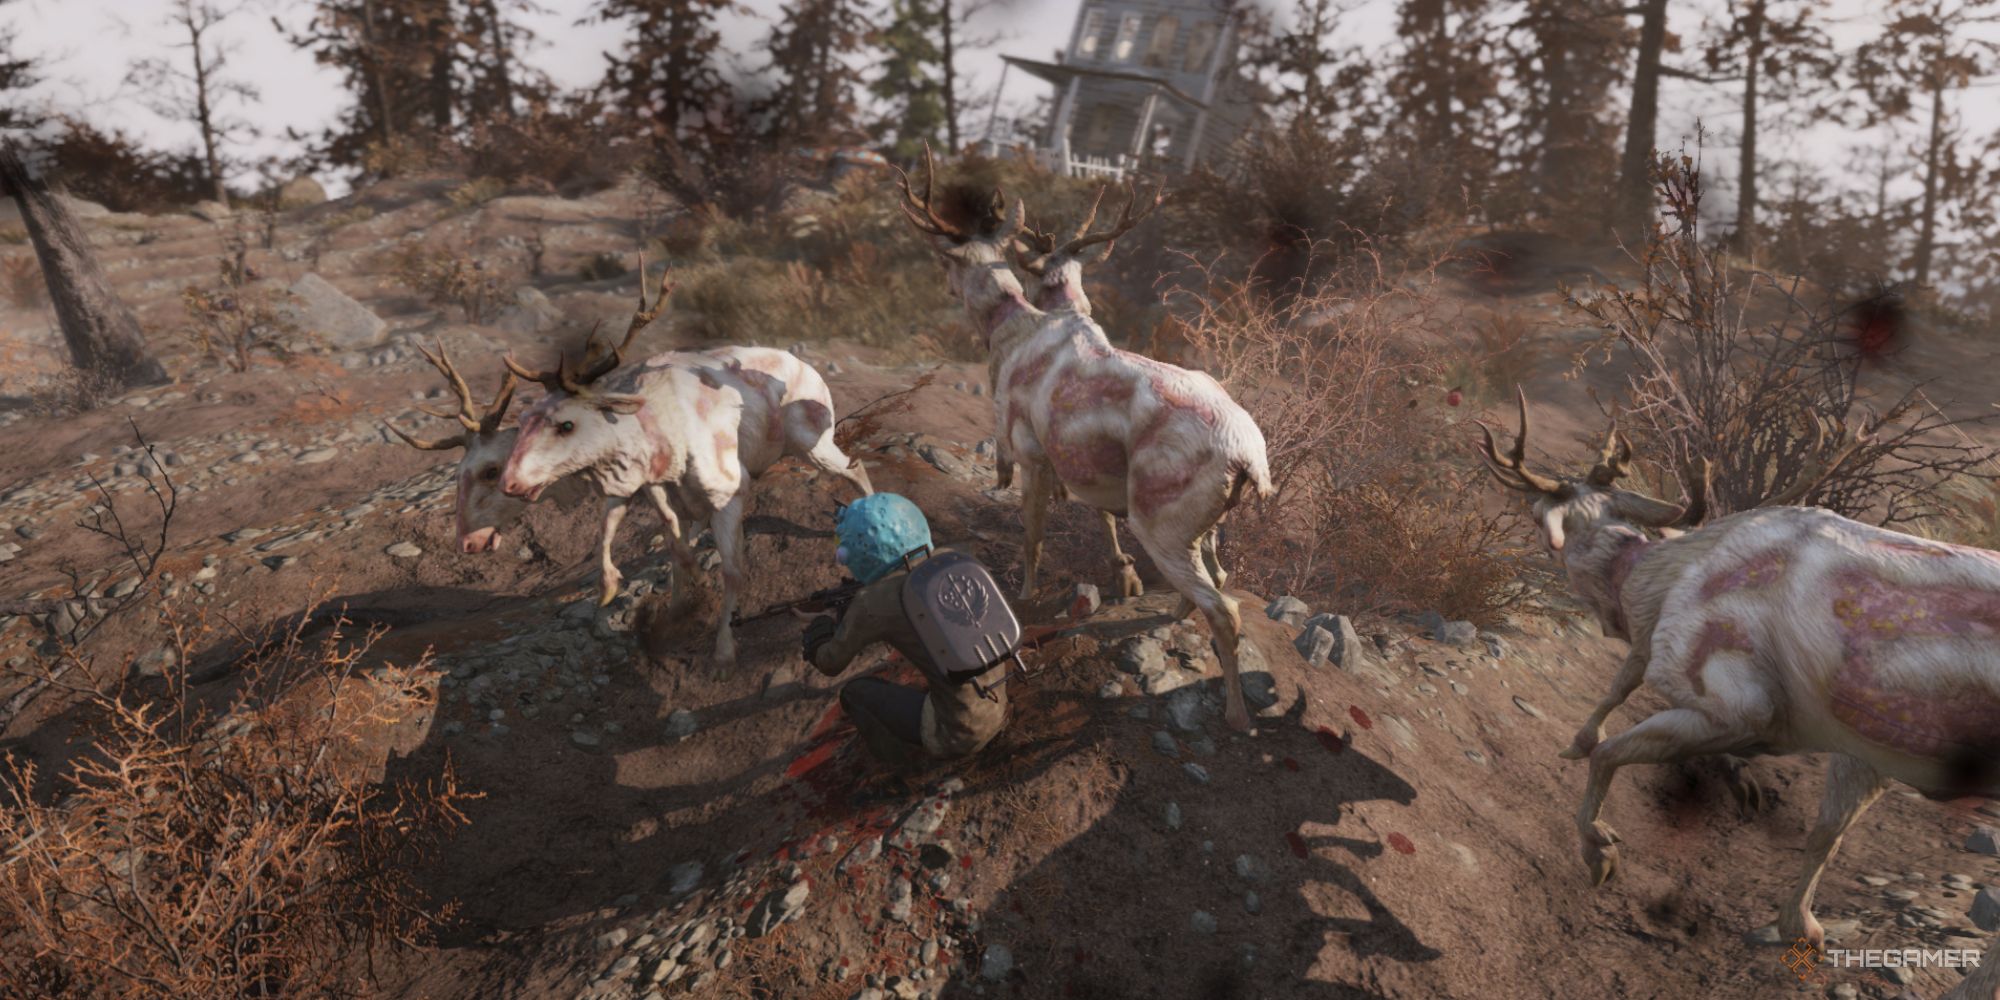 A herd of albino radstags attacking the player in Fallout 76